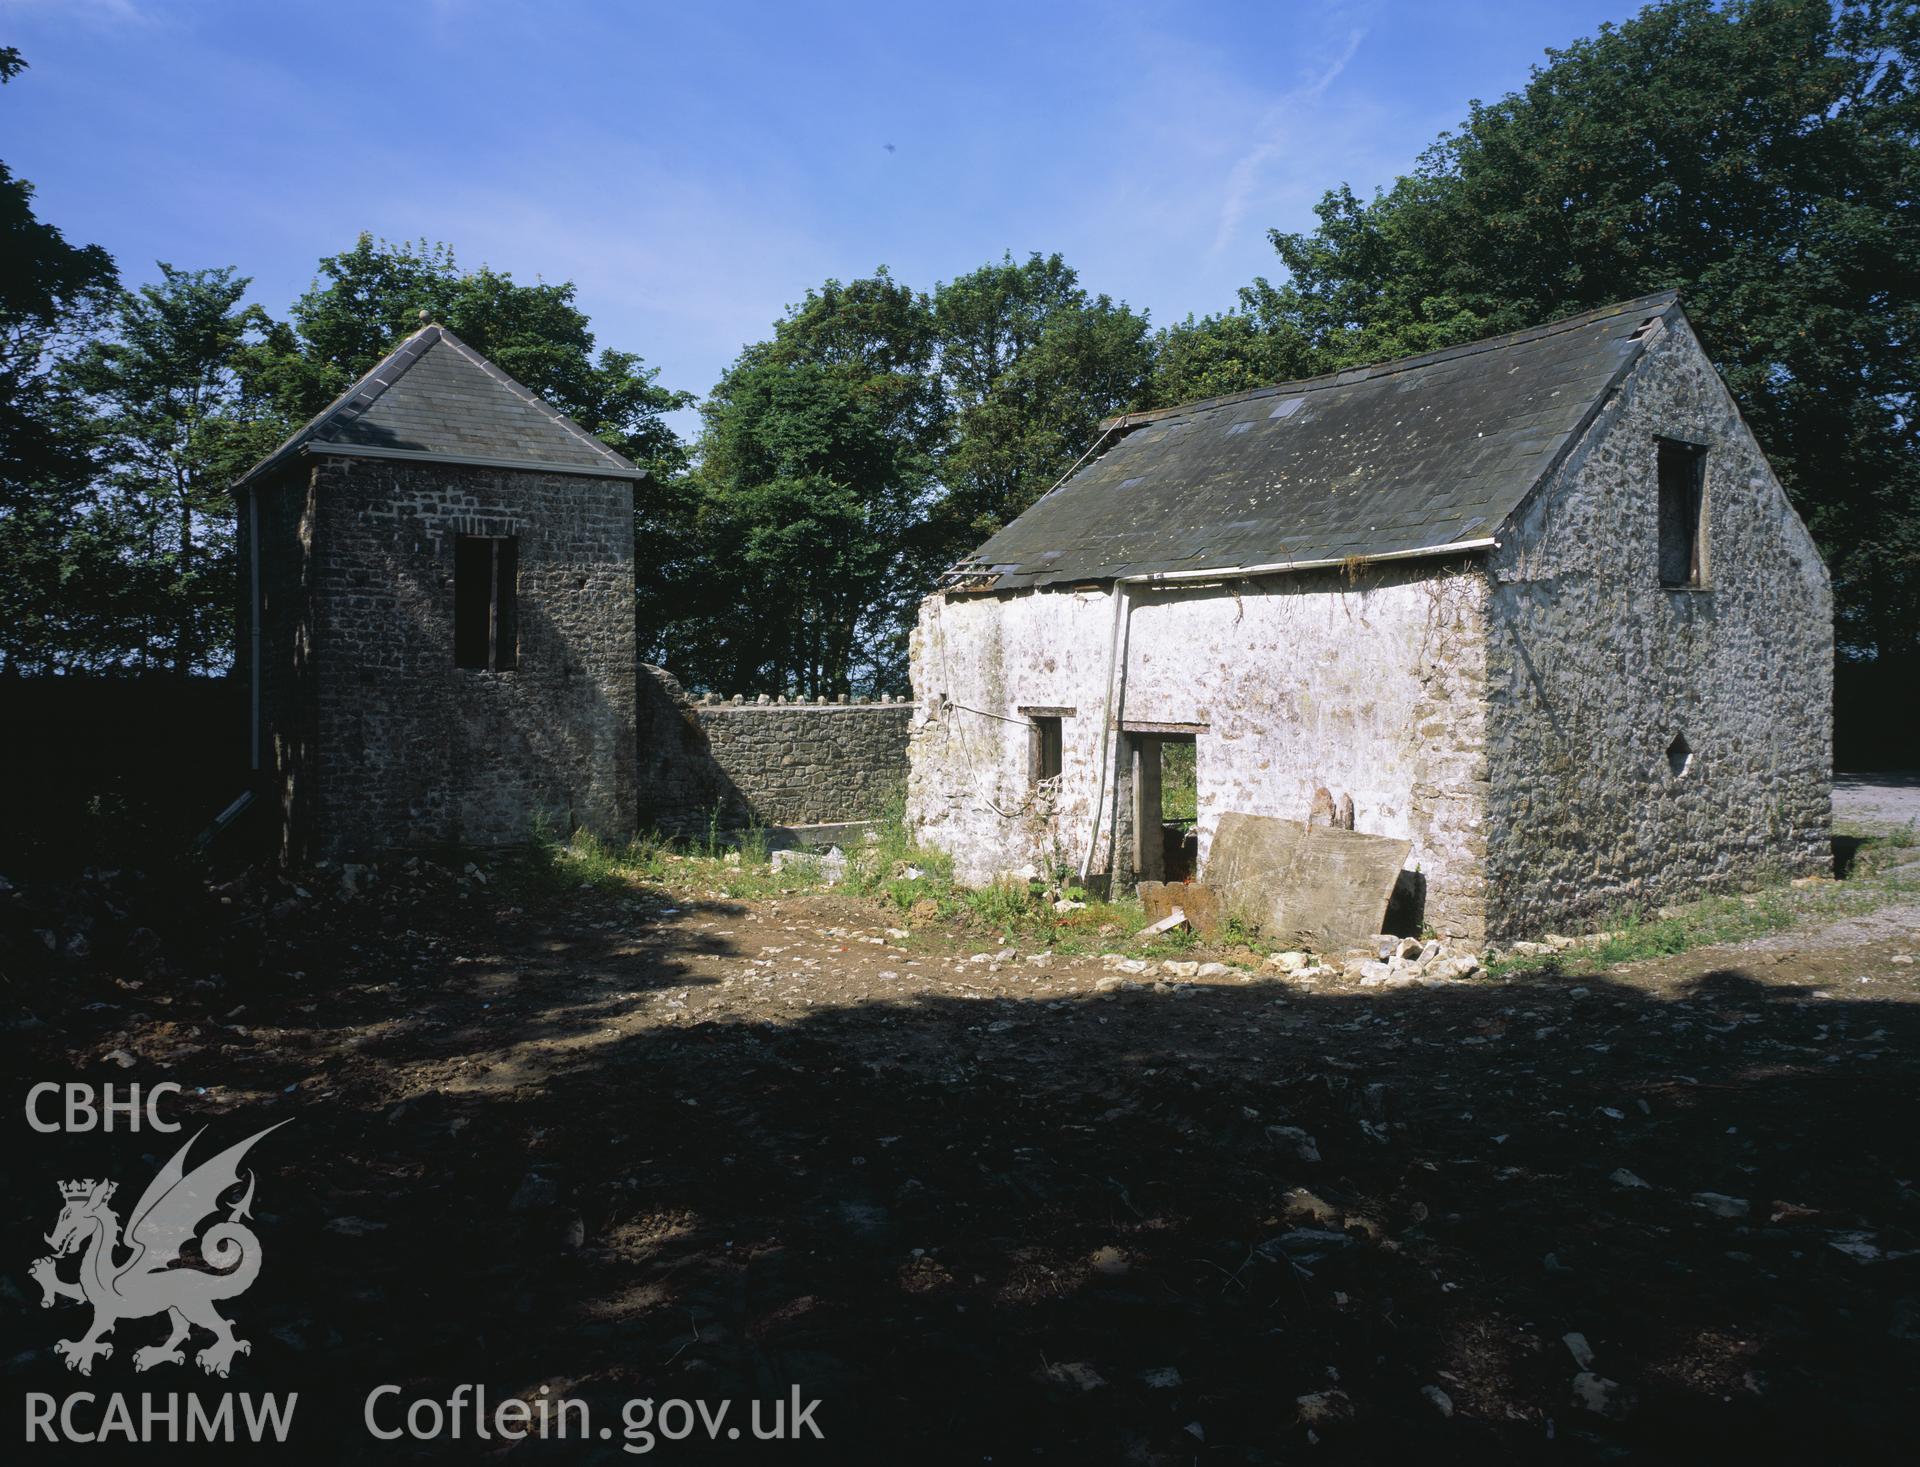 RCAHMW colour transparency showing  view of the dovecot and pheasant house at Nash Manor  taken by I.N. Wright, 2002